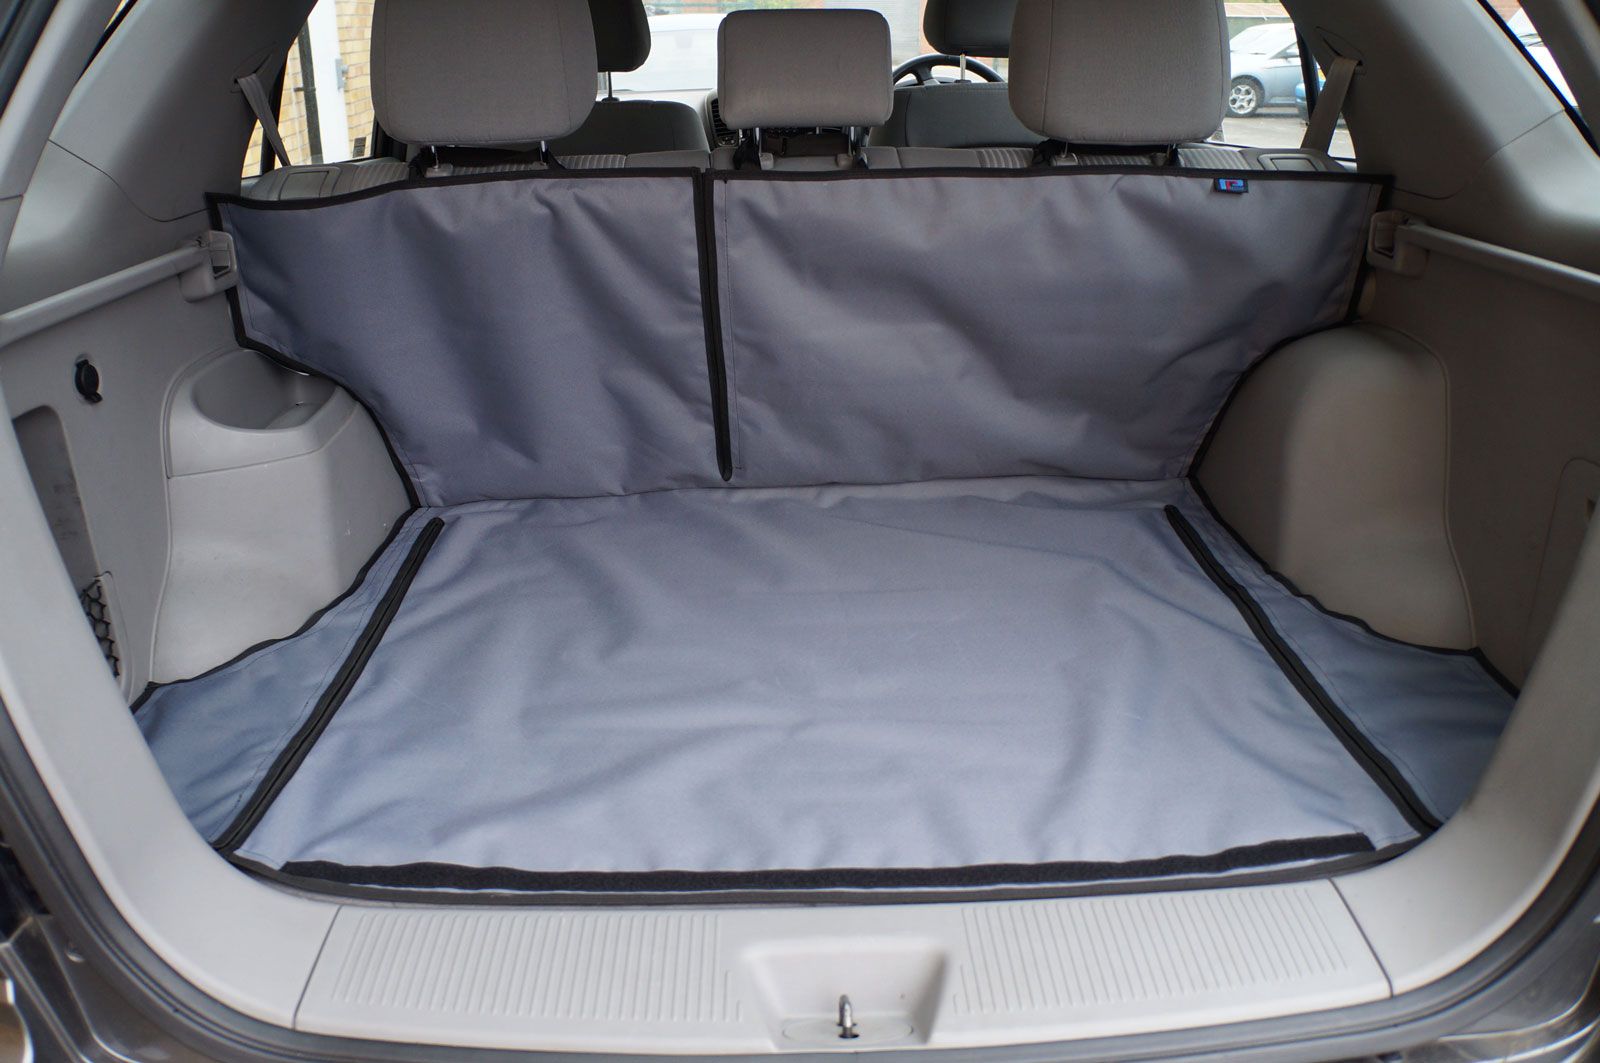 Lexus RXL 450H 5 Seats 2016 Fully Tailored Load Liner without bumper flap - Example